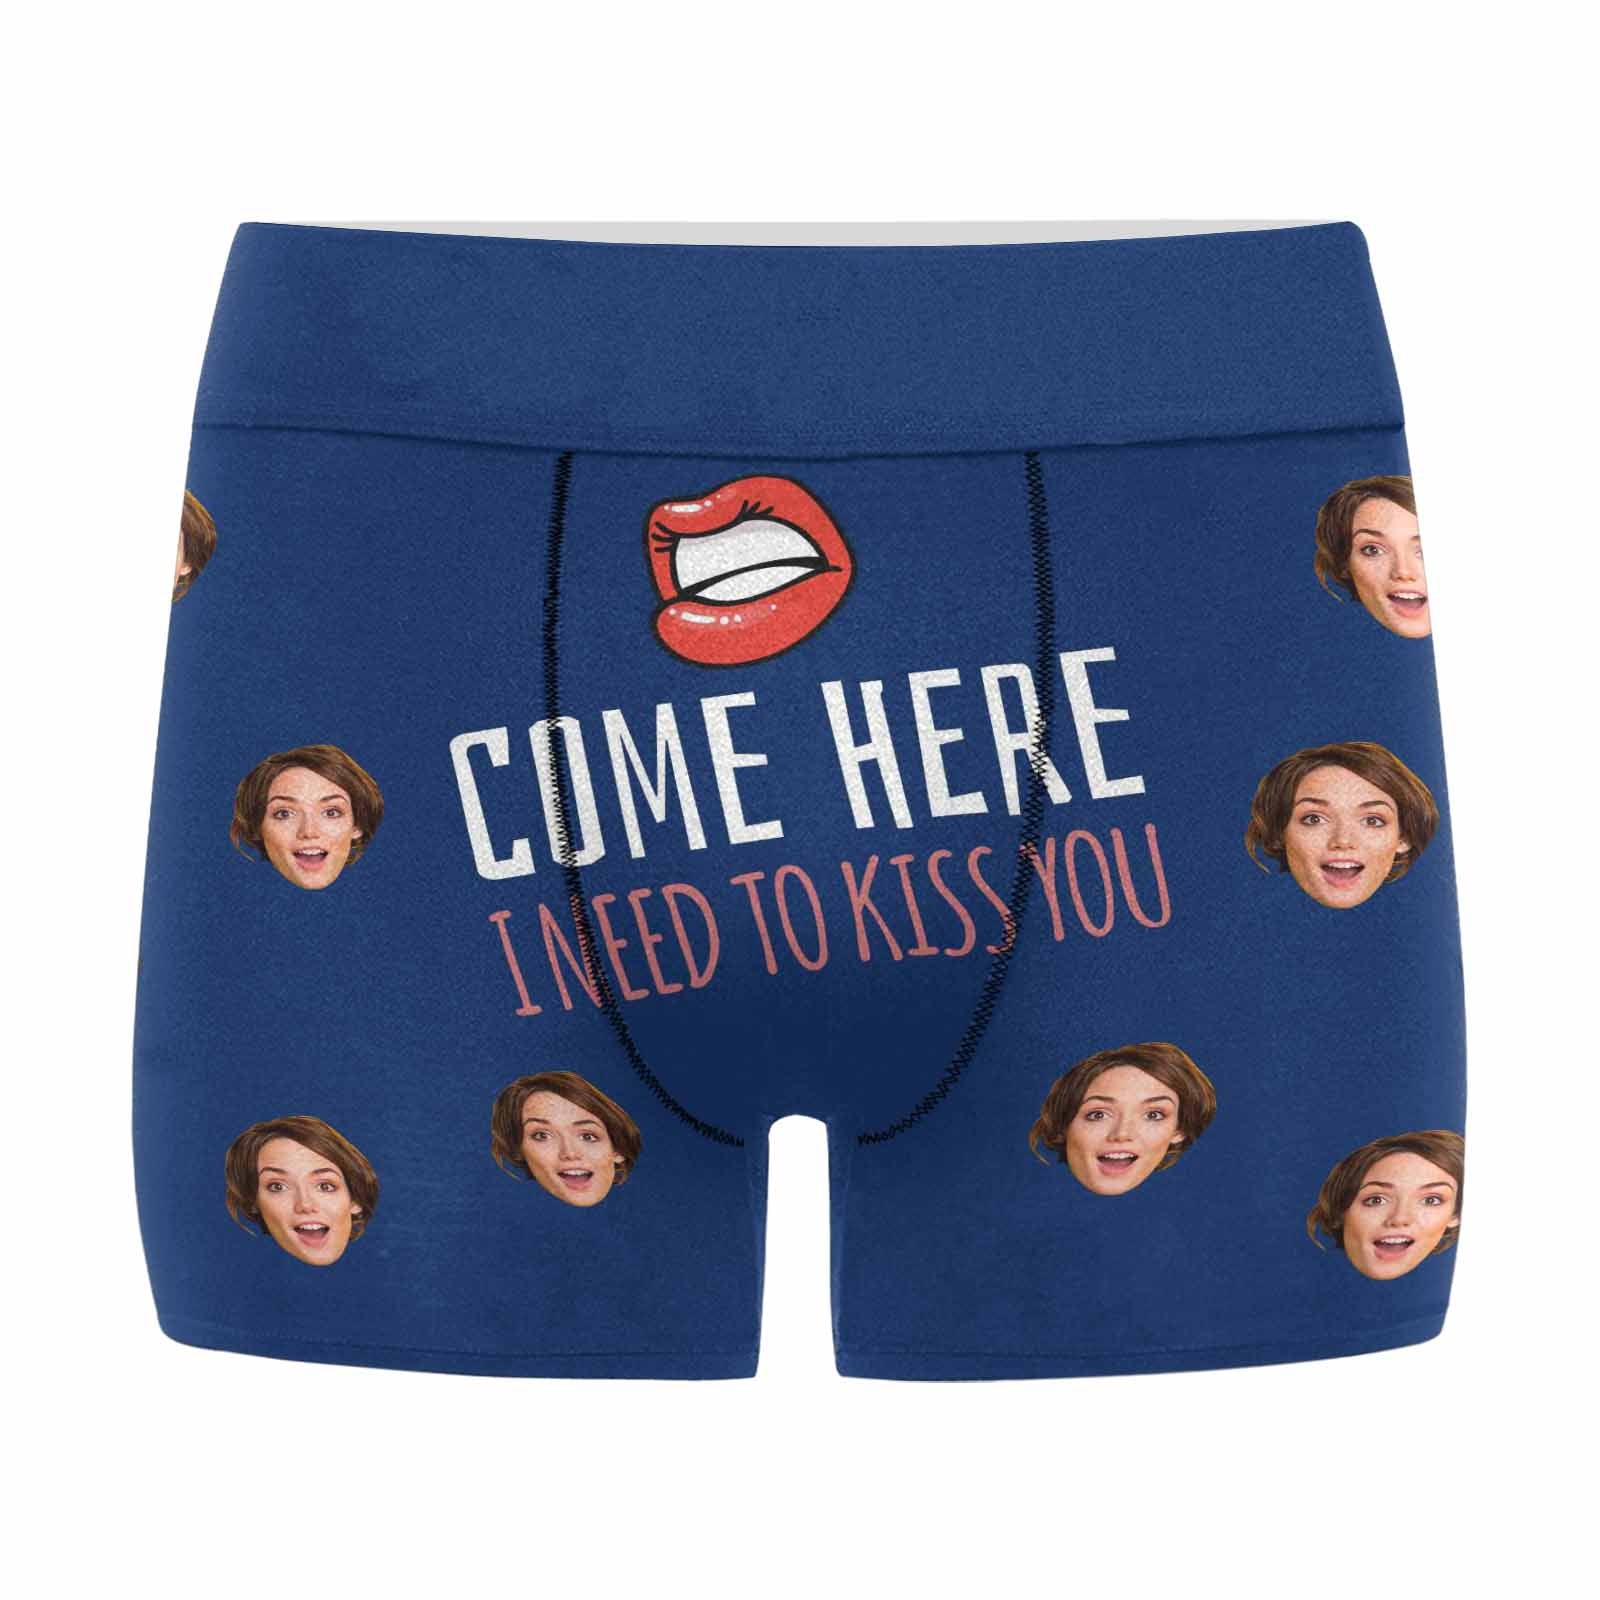 Custom Face Underwear for Men with Face on Novelty Boxer Briefs  Personalized Boxers with Photos Valentine's Day